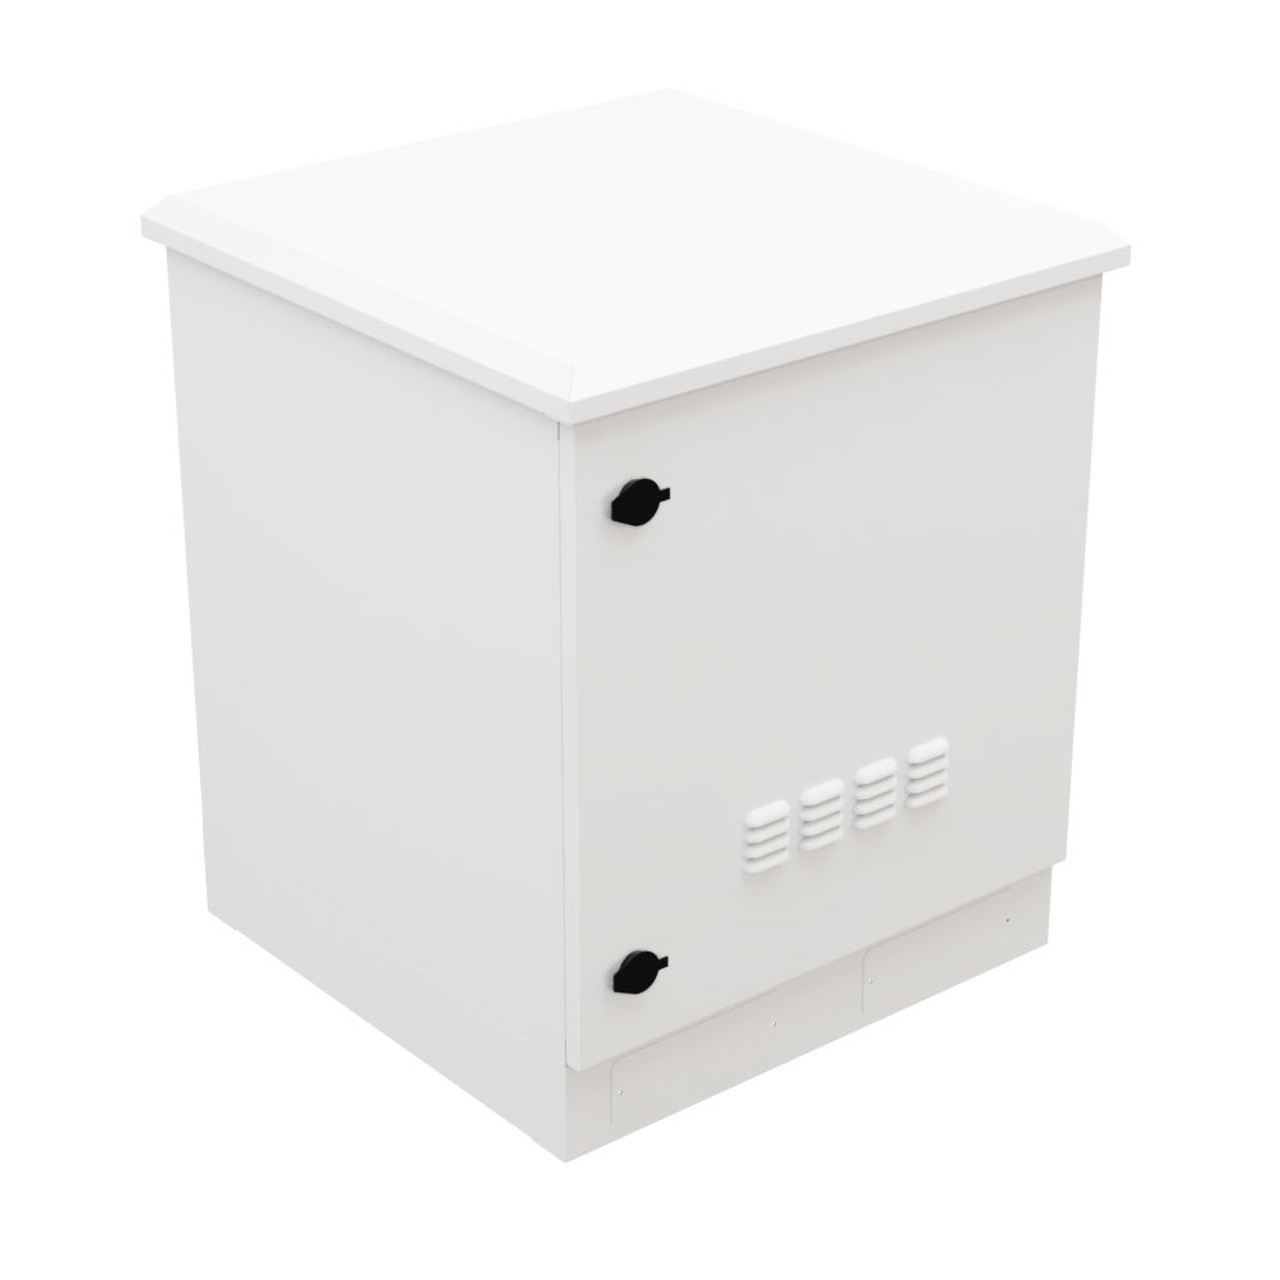 Floor Mount Outdoor Network Cabinet, 12U, Fans with Temperature Control, White, NEMA-Rated